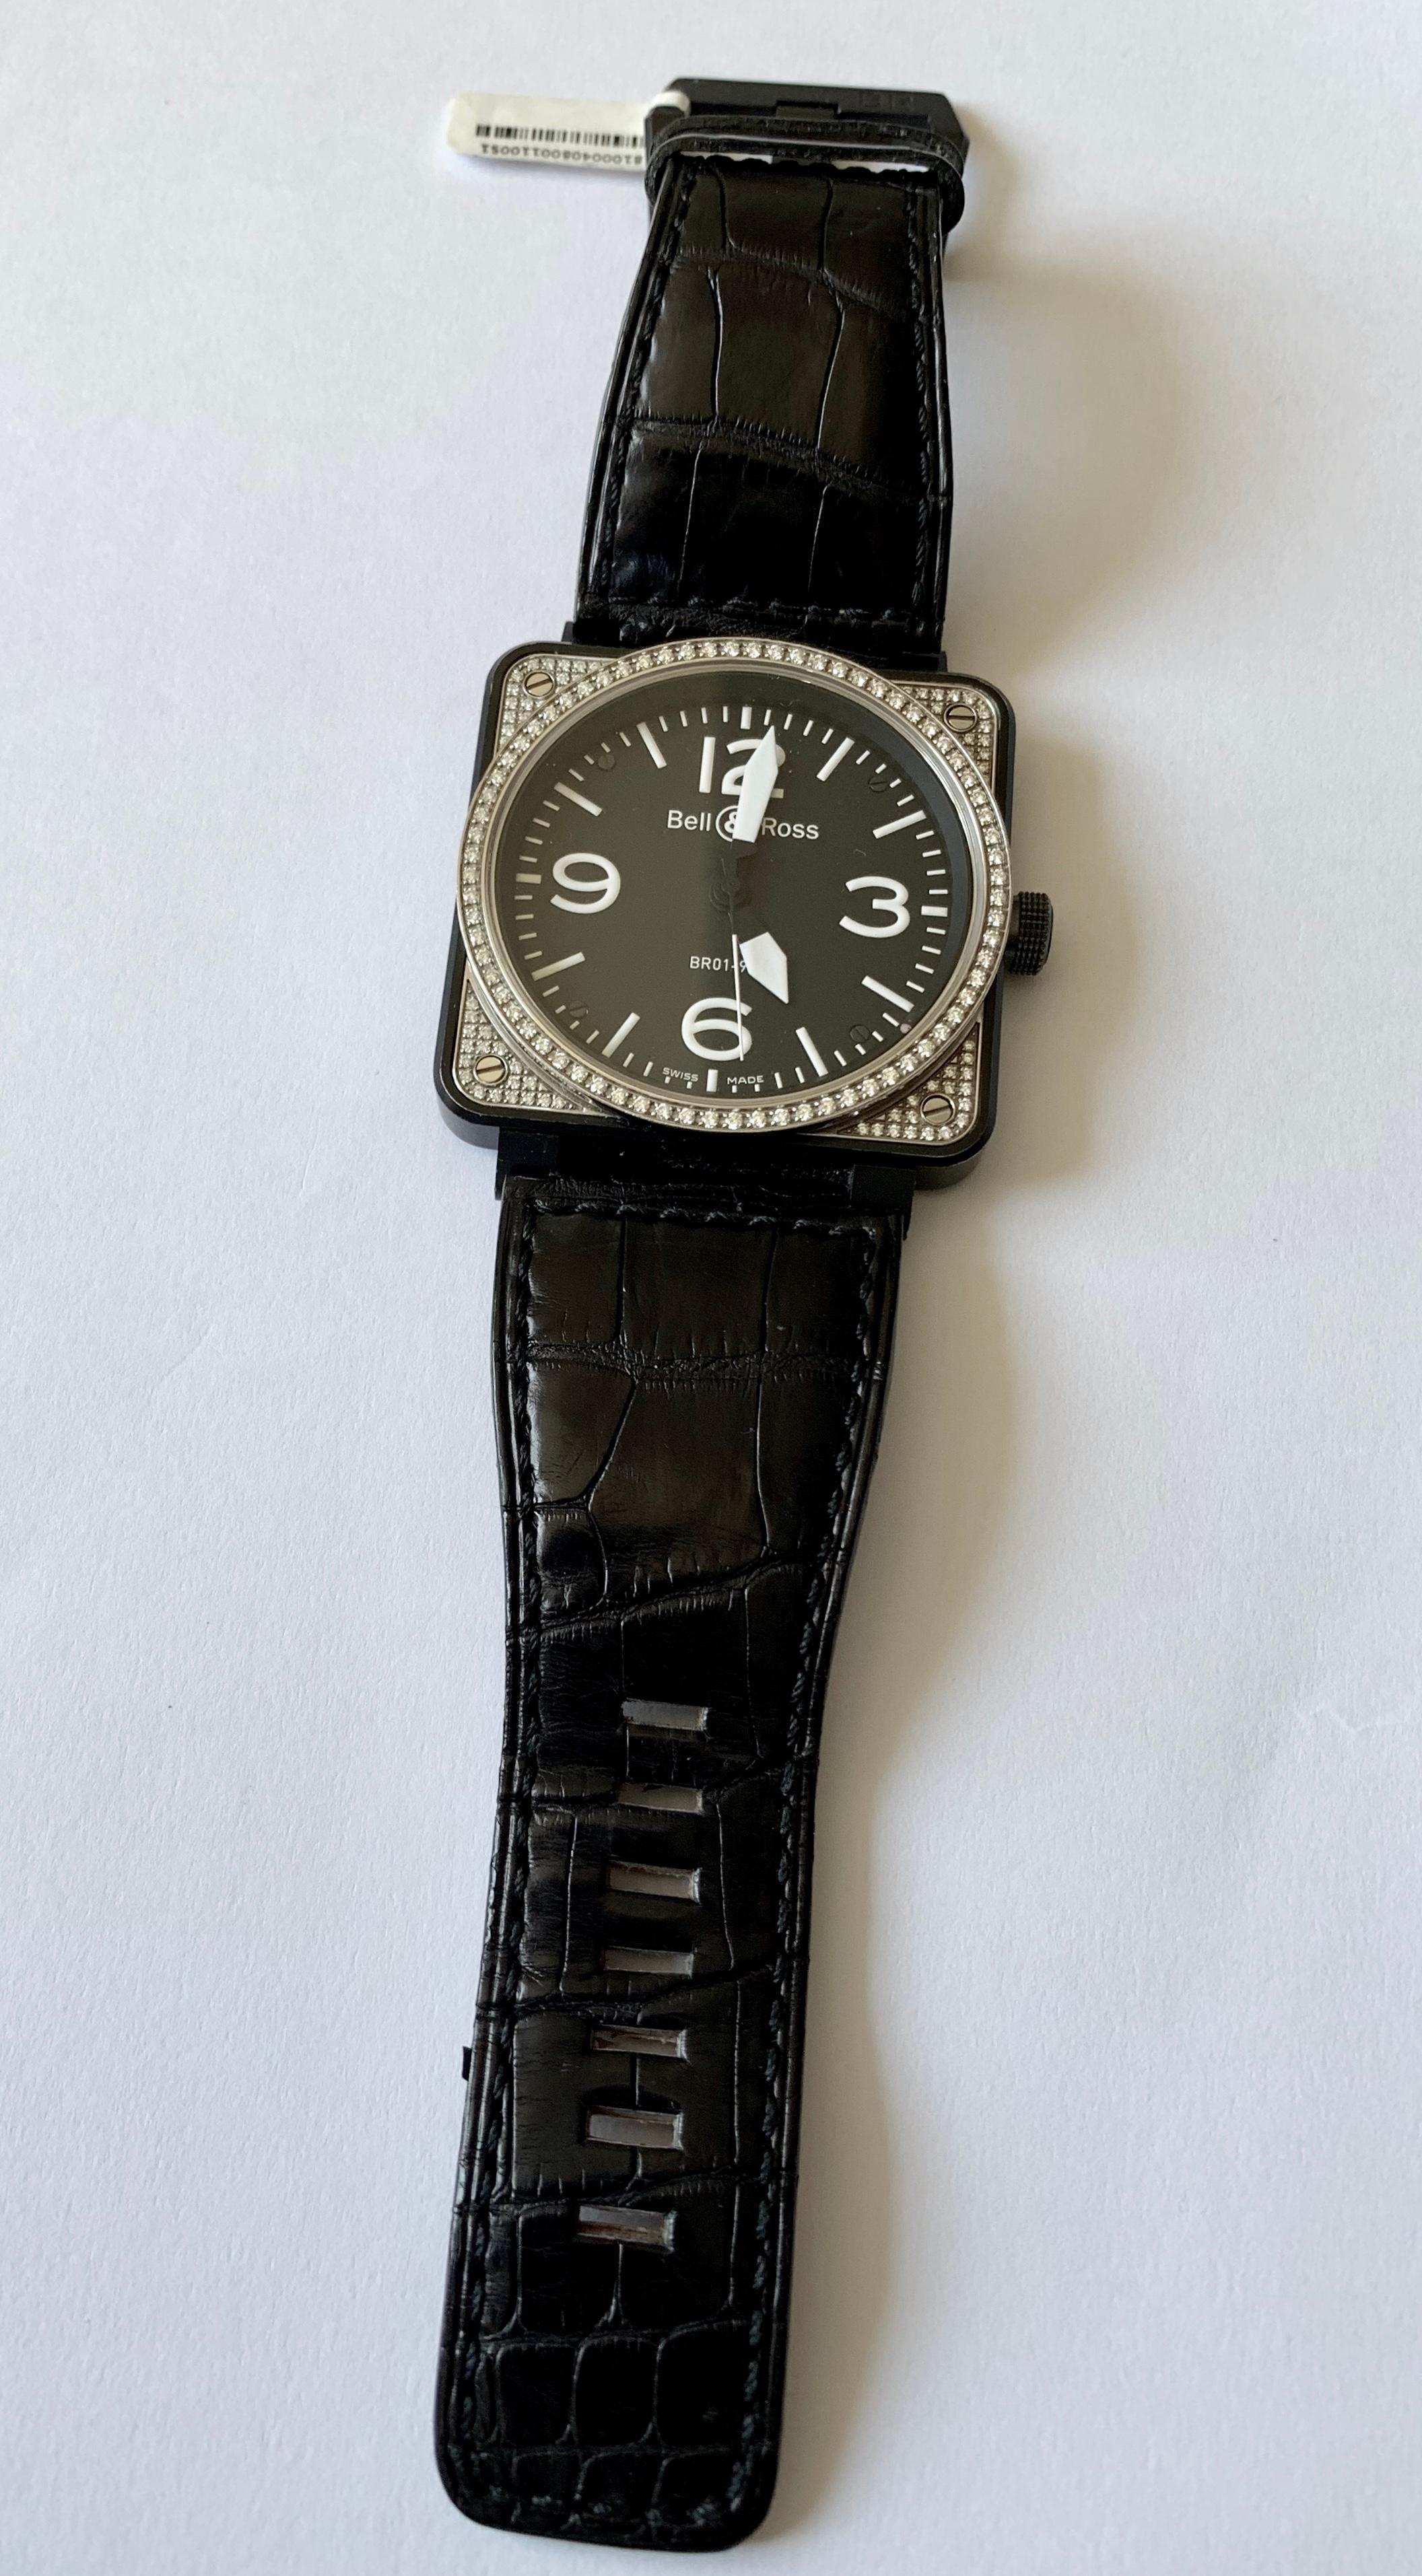 Iconic Bell & Ross Watch model BR 01 92 Diamond Automatic movement. Case steel with Diamond Bezel, case size 46 mm, comes with a black leather strap. Comes with original box and papers. Purchase date December 2008. In very good condition. Original